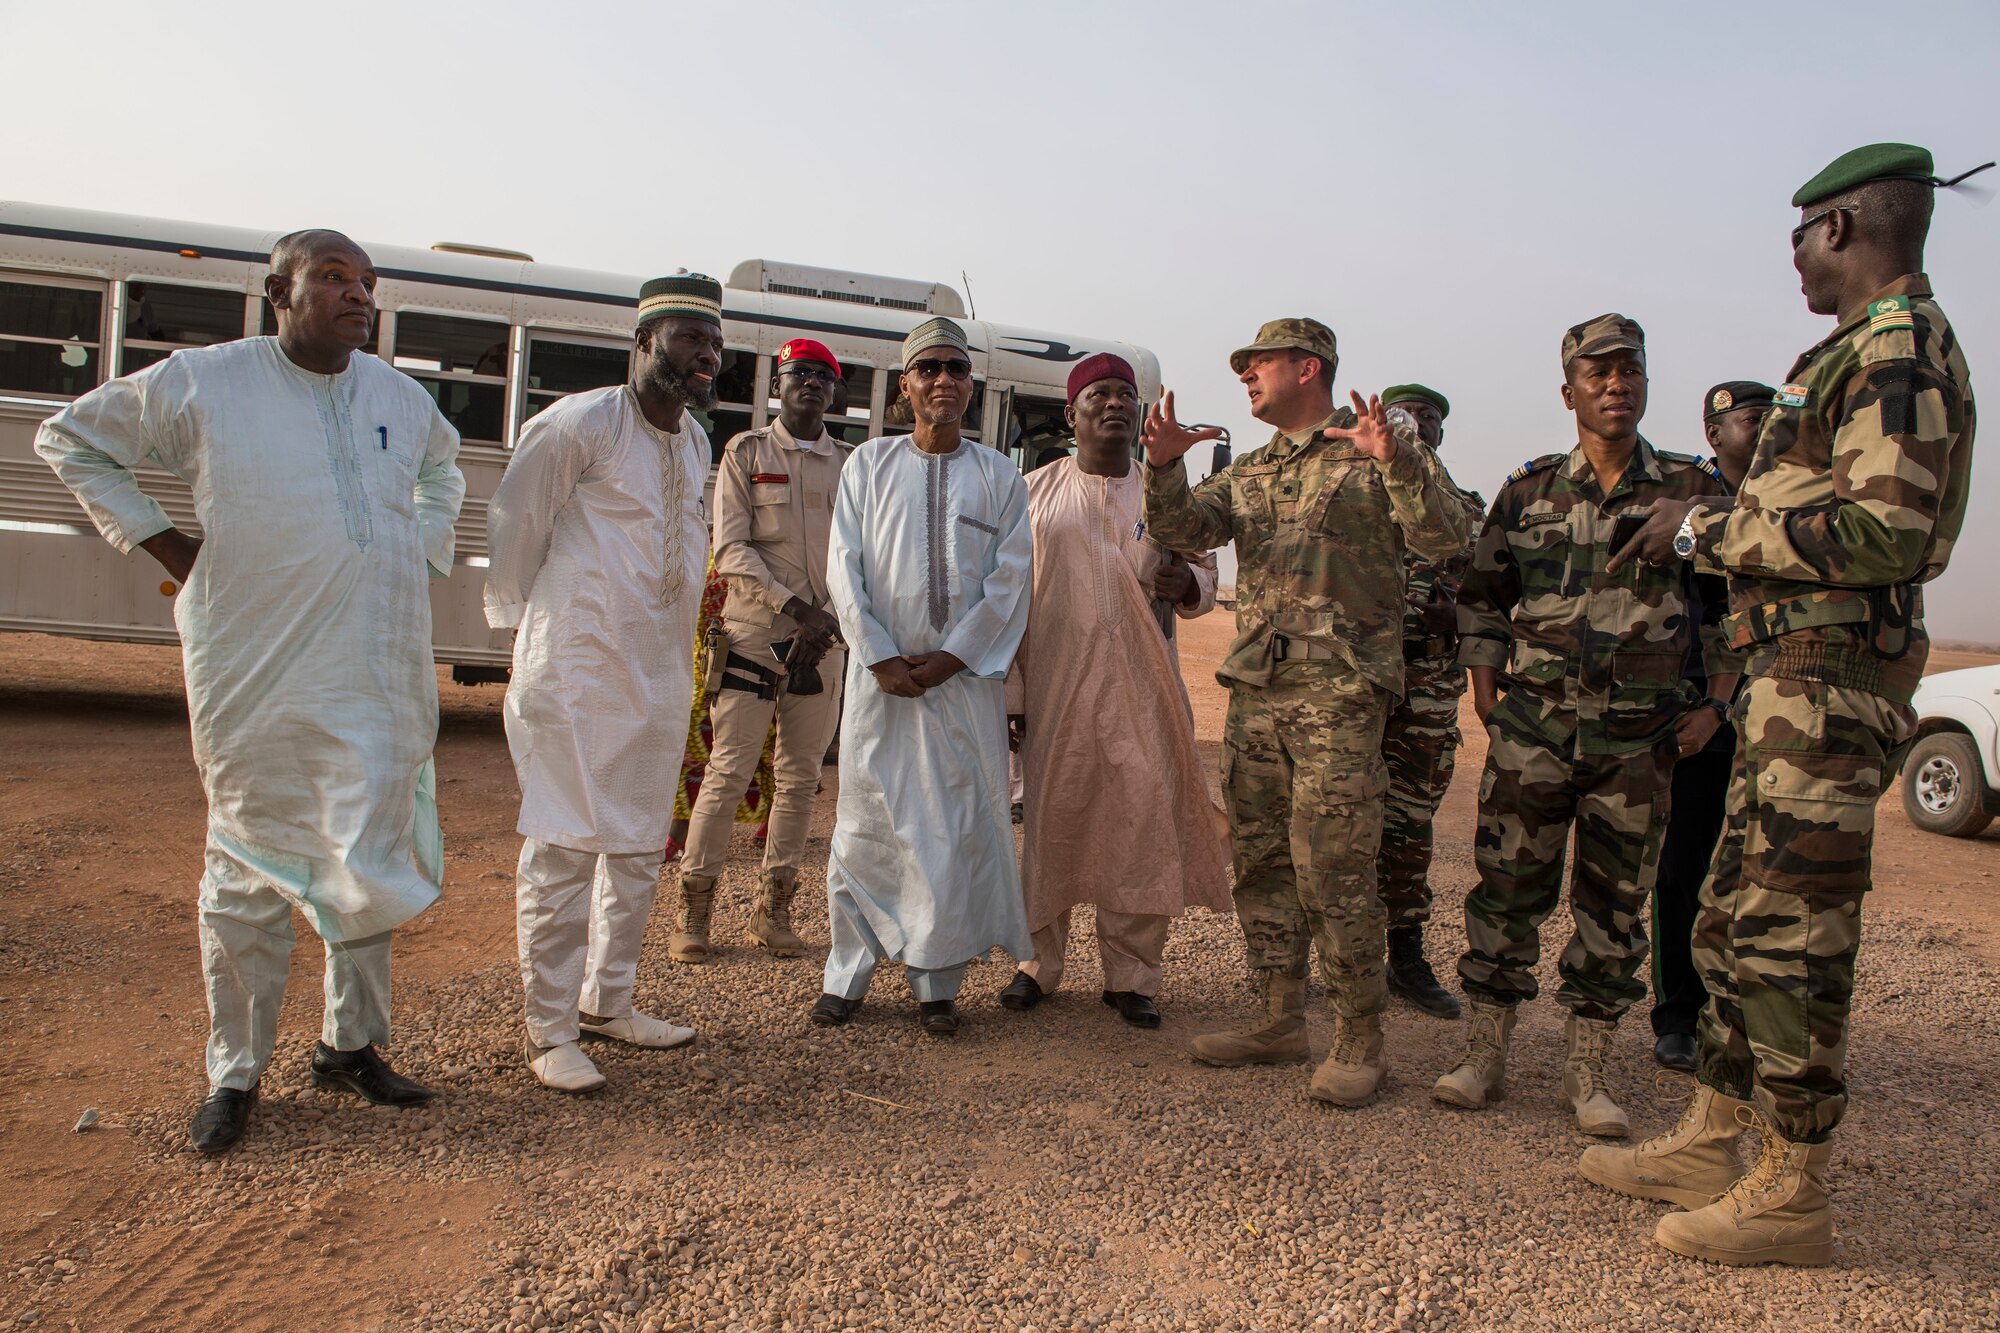 U.S. Air Force Lt. Col. Brad Harbaugh, 724th Expeditionary Air Base Squadron commander, gives commanders of the Forces Armées Nigeriennes and Agadez civic leaders a tour of base construction projects Feb. 21, 2018, at Nigerien Air Base 201, Niger. Harbaugh used the tour to discuss with civic leaders how integrated capabilities and interoperability promote regional partnerships. (U.S. Air Force photo by Tech. Sgt. Nick Wilson)